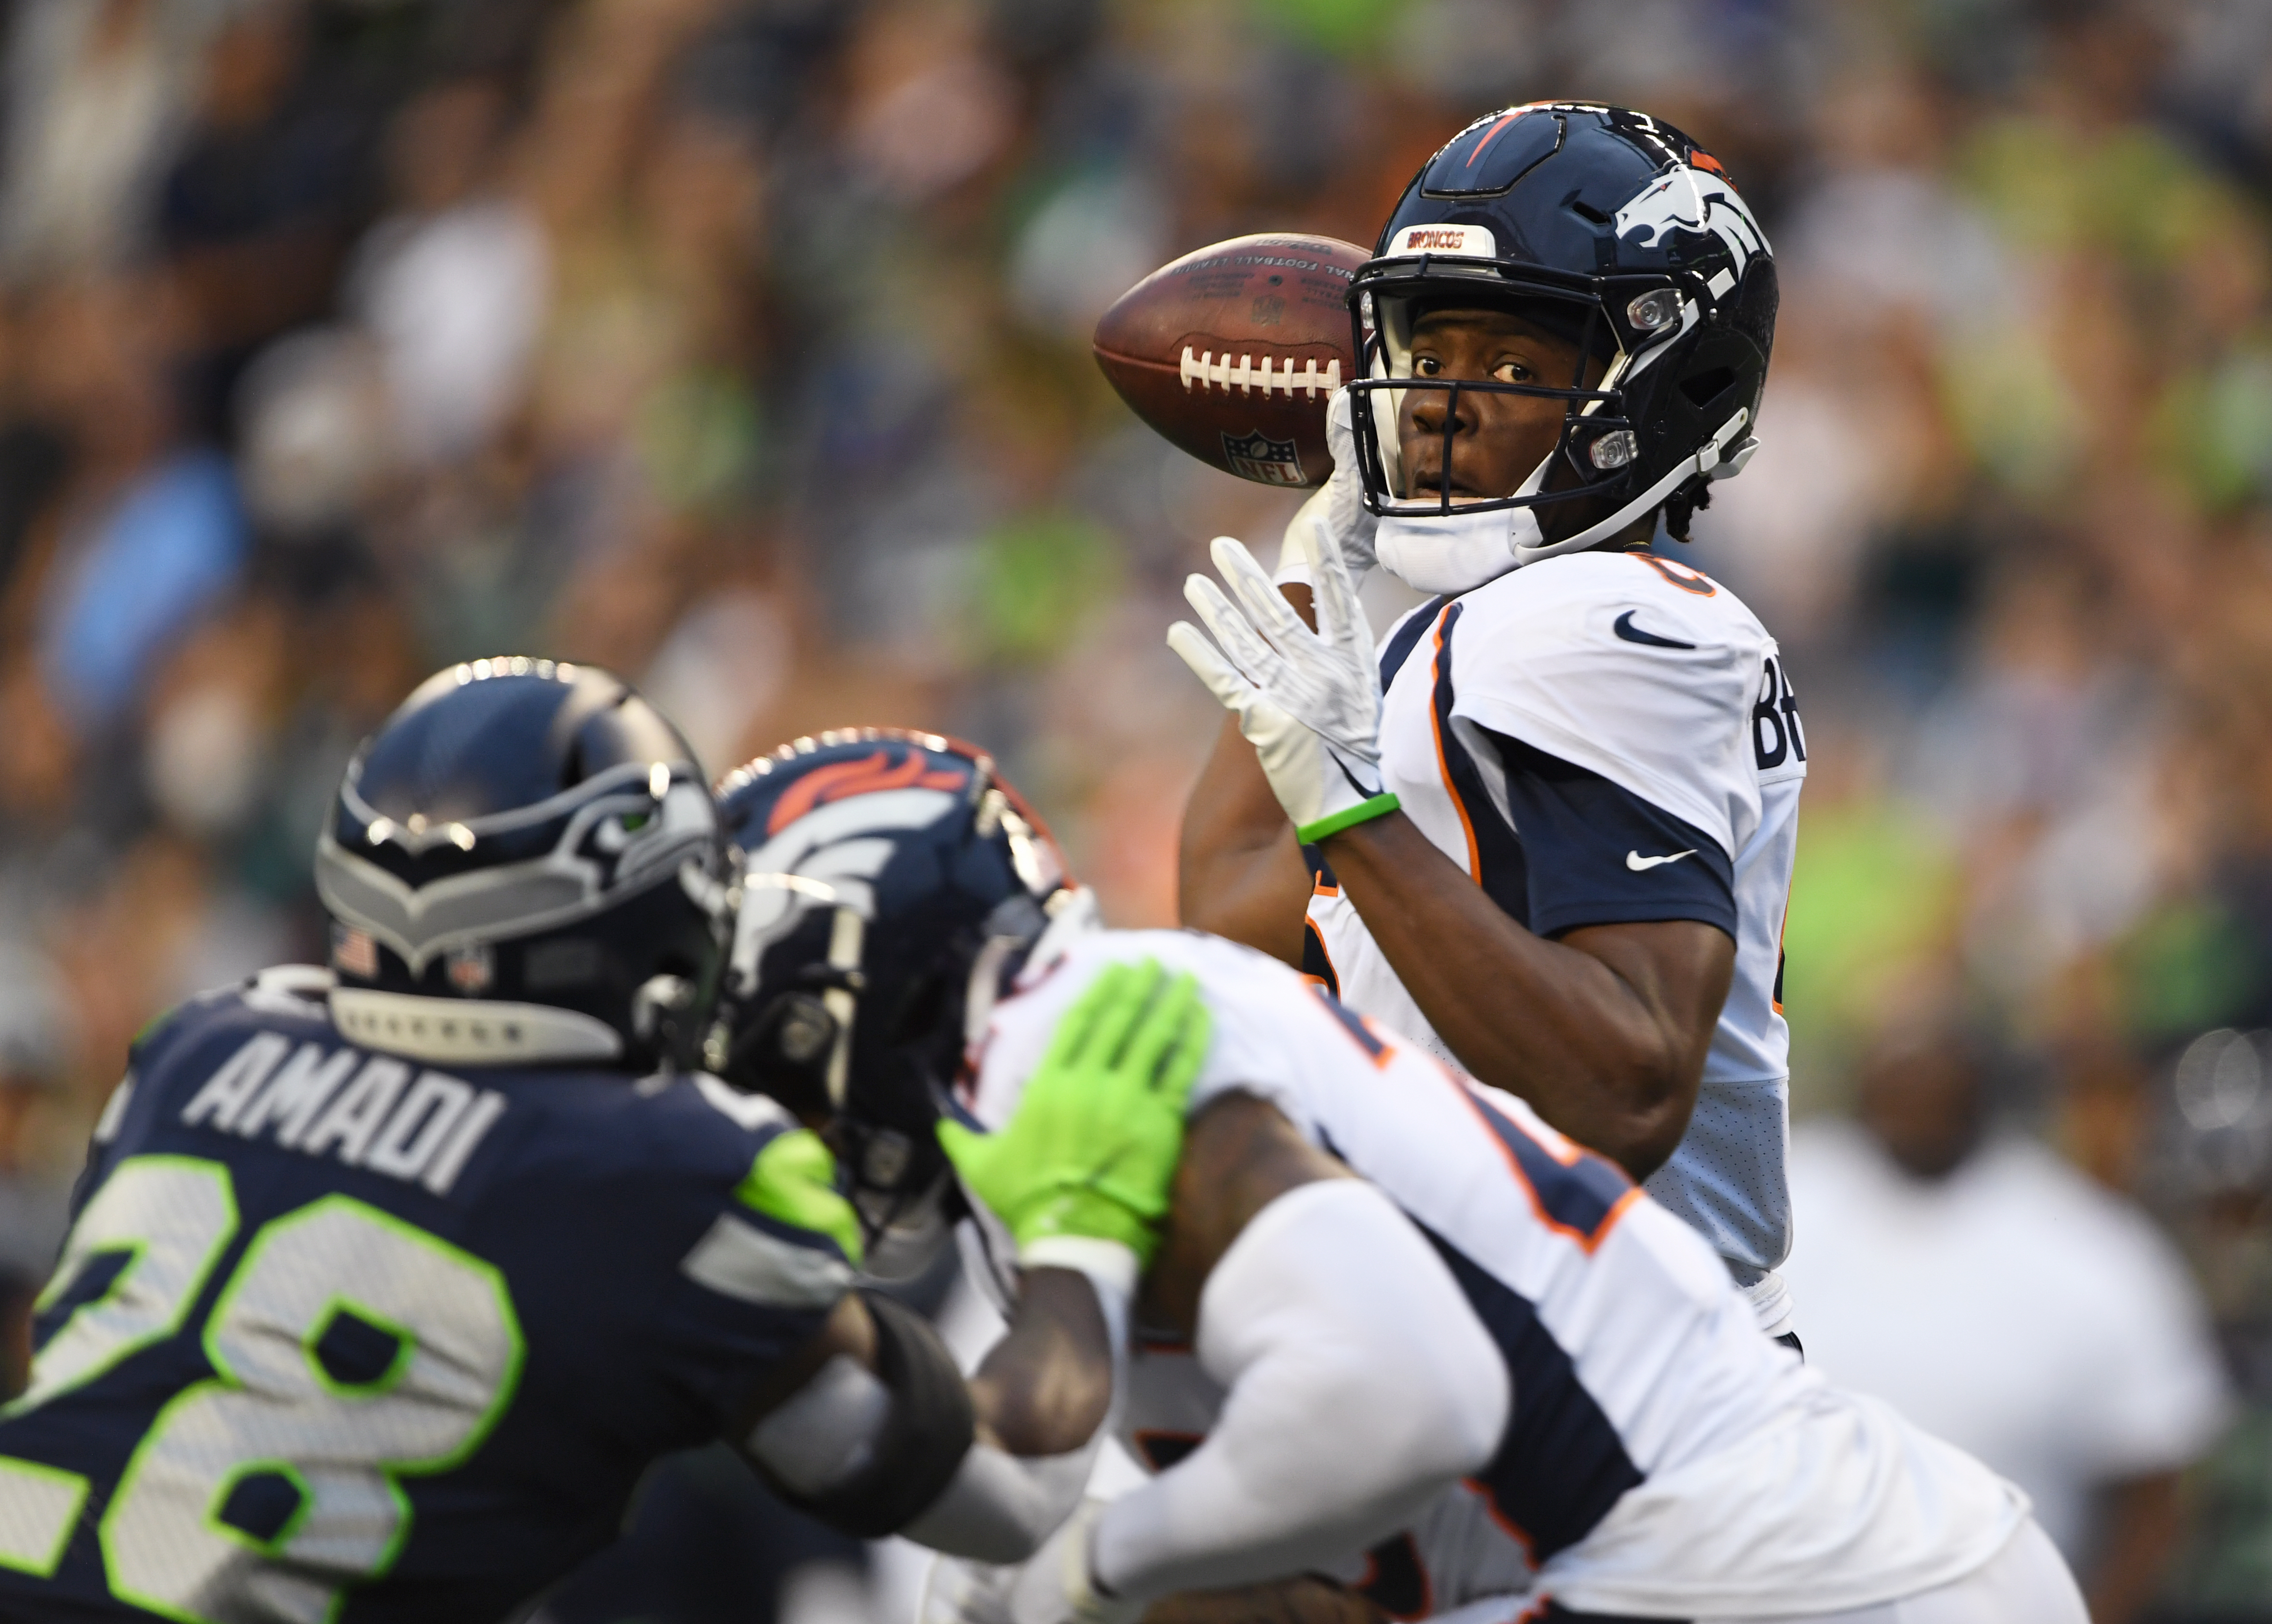 Denver Broncos quarterback Teddy Bridgewater throws a touchdown pass early in the game at Lumen Field on August 21, 2021 in Seattle.